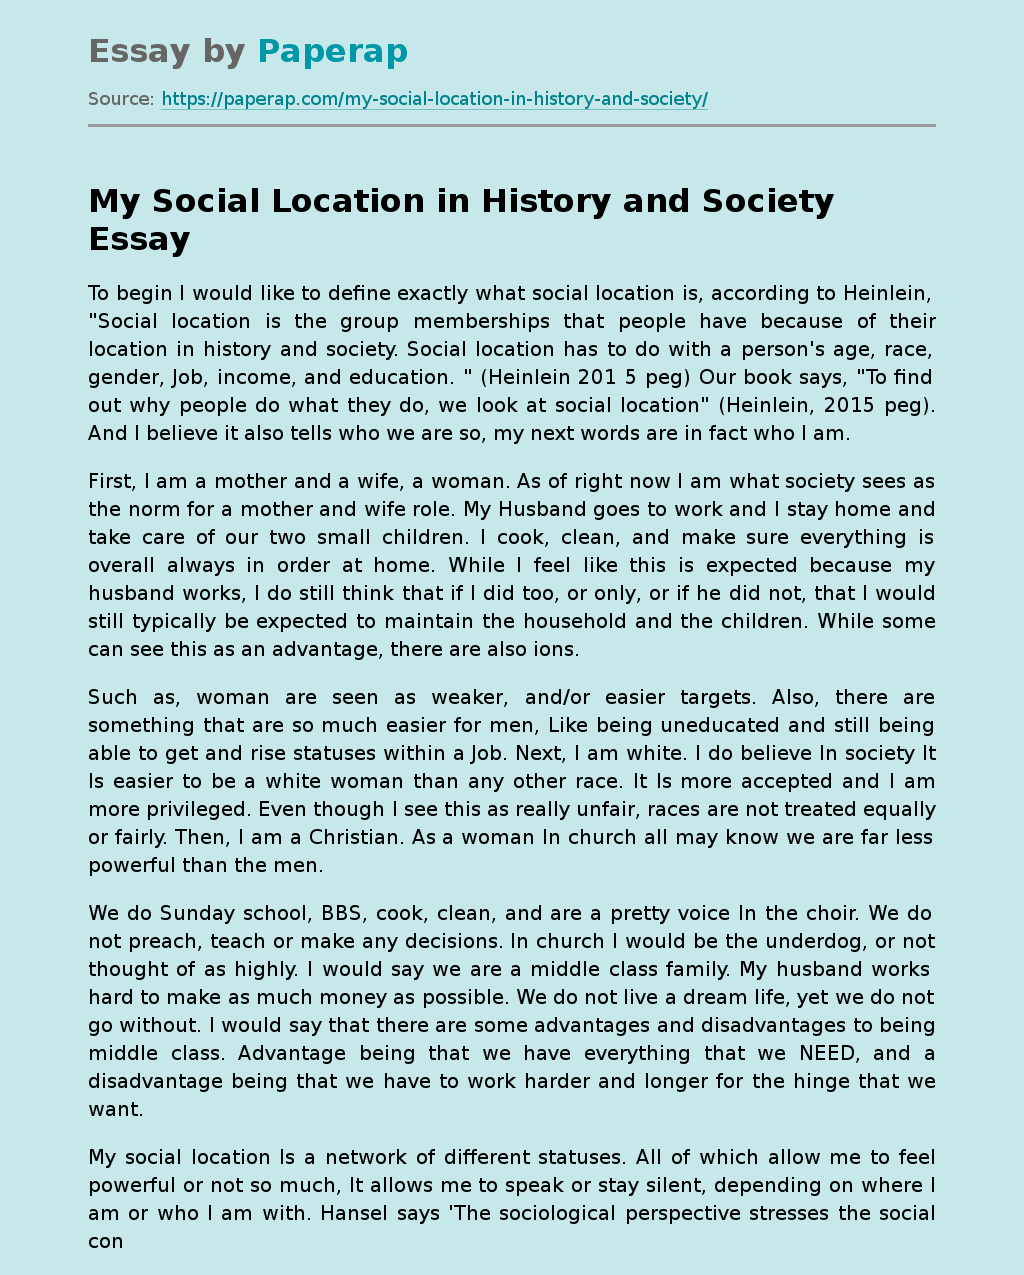 My Social Location in History and Society